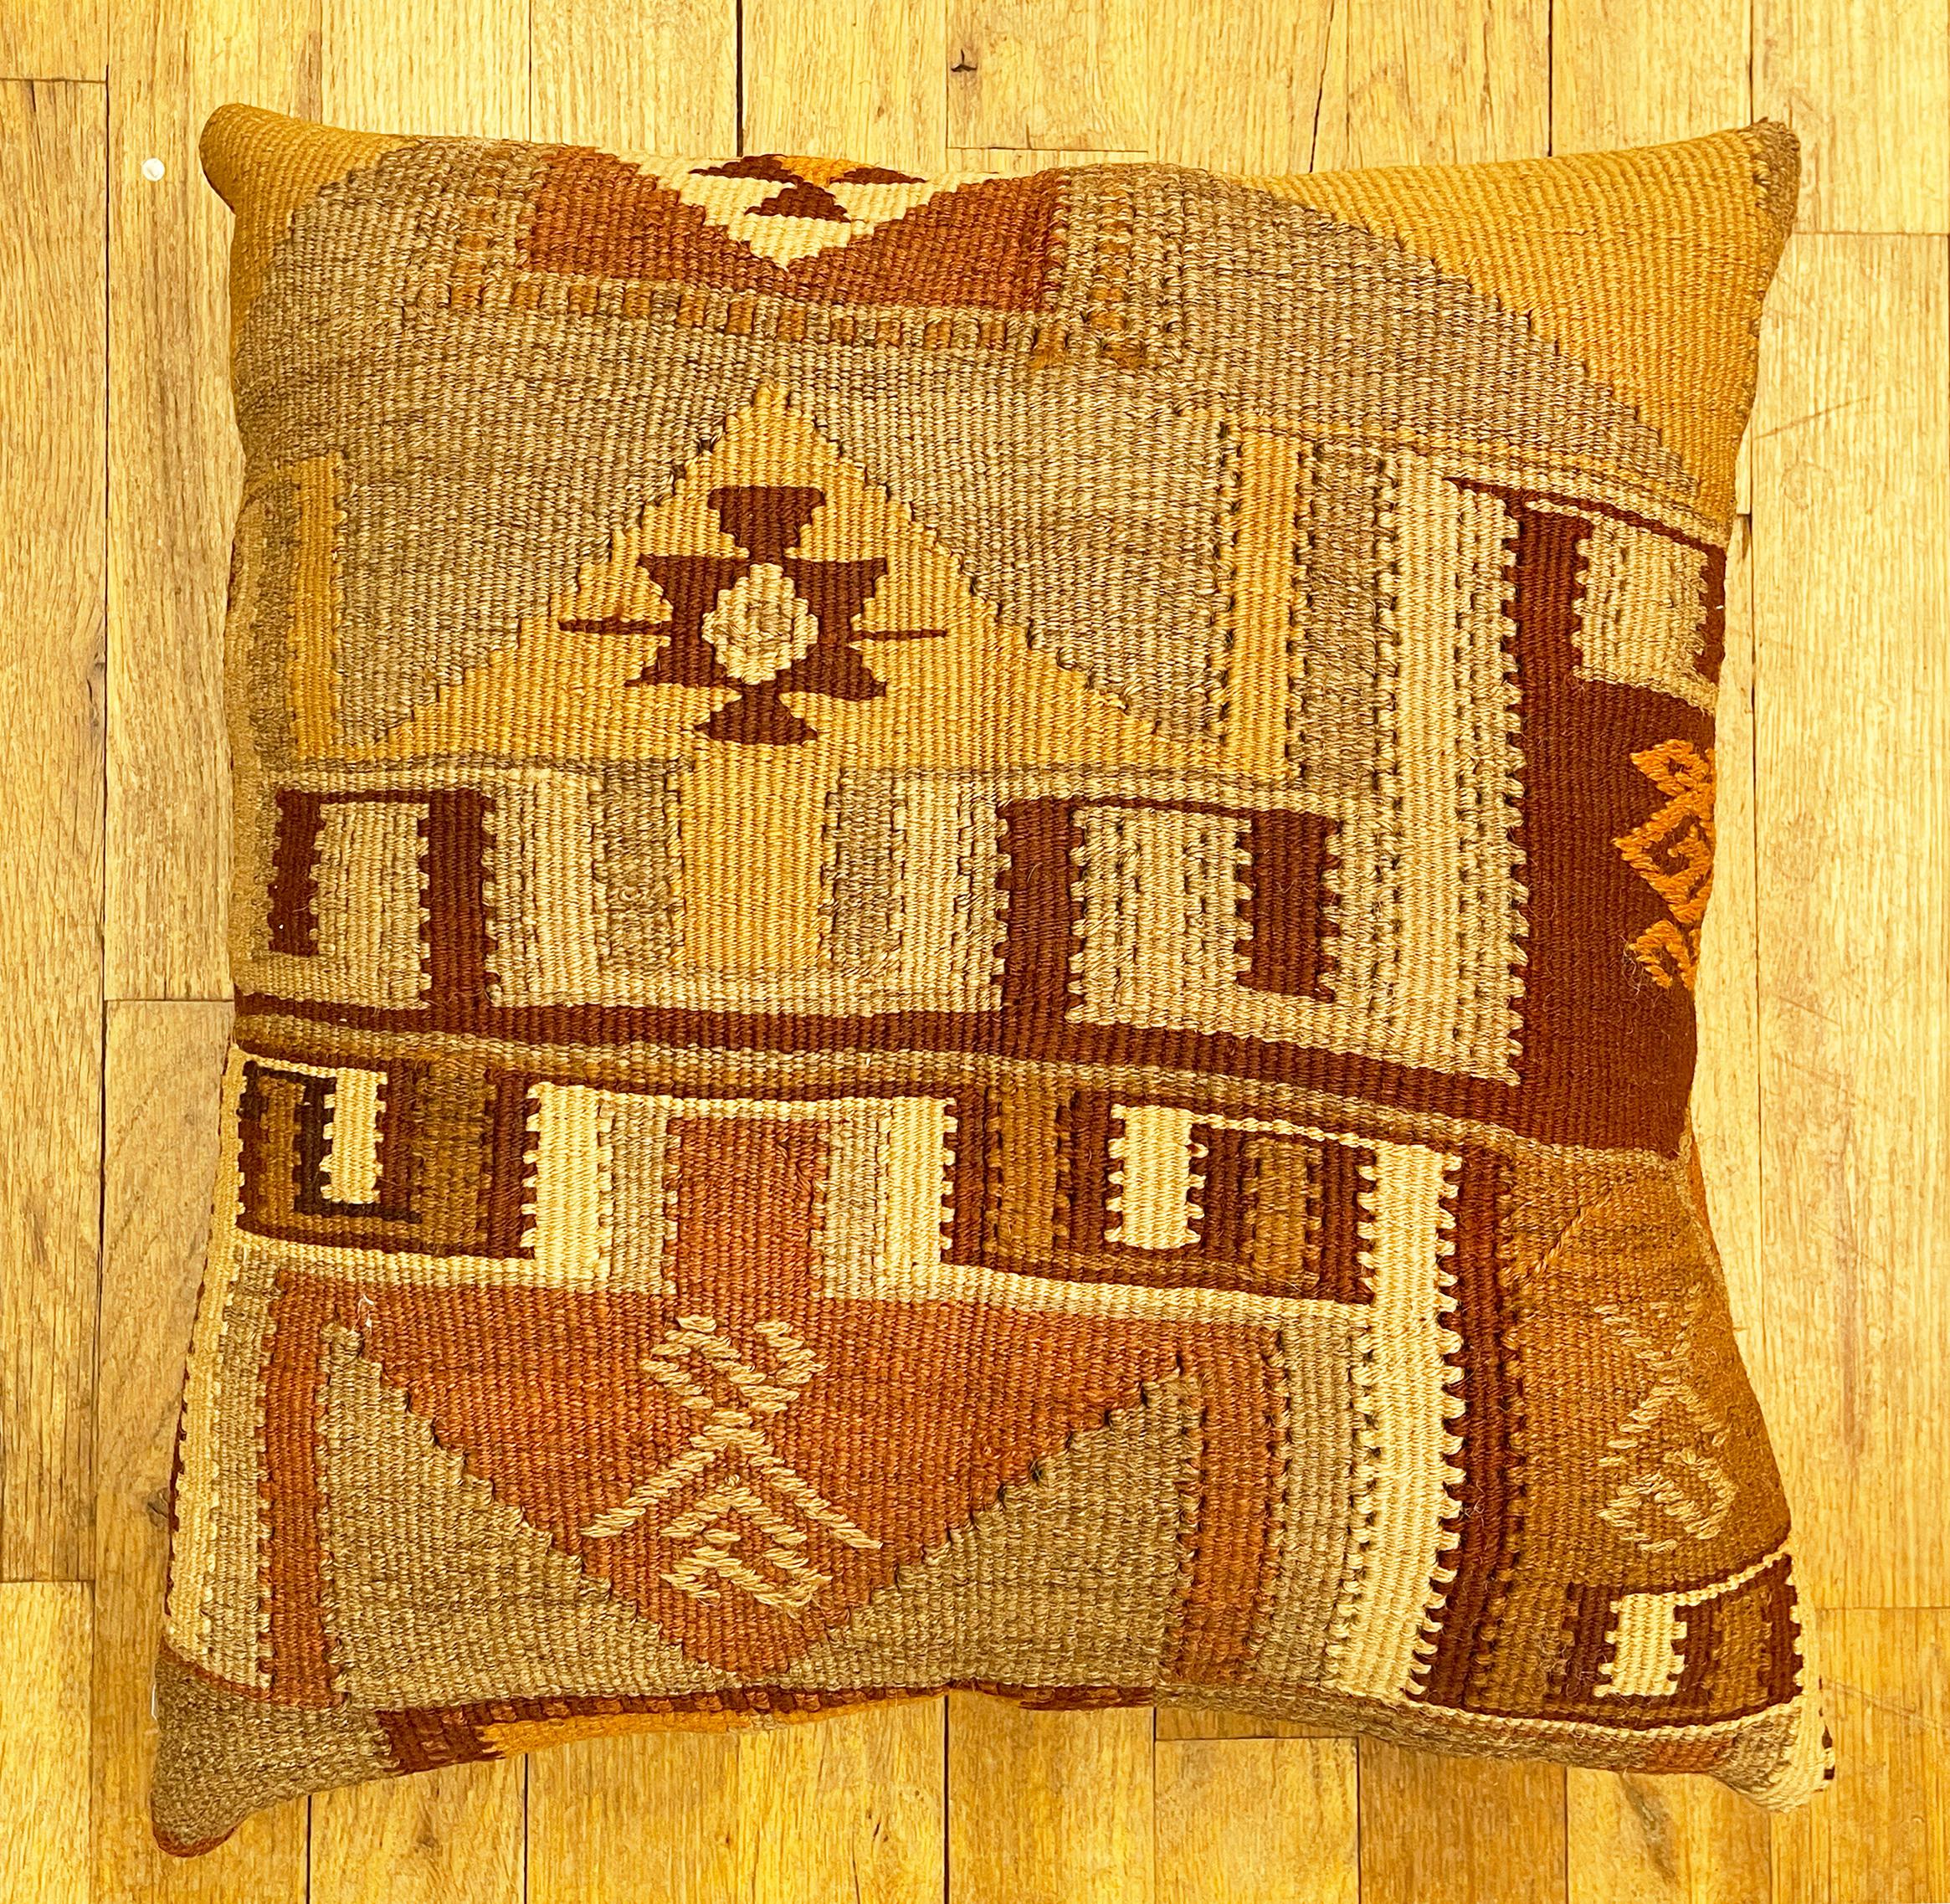 Vintage Turkish Kilim rug pillow; size 17” x 18”.

A vintage decorative pillow with geometric abstracts allover a brown central field, size 17” x 18”. This lovely decorative pillow features a vintage fabric of a KIilim carpet on front which is